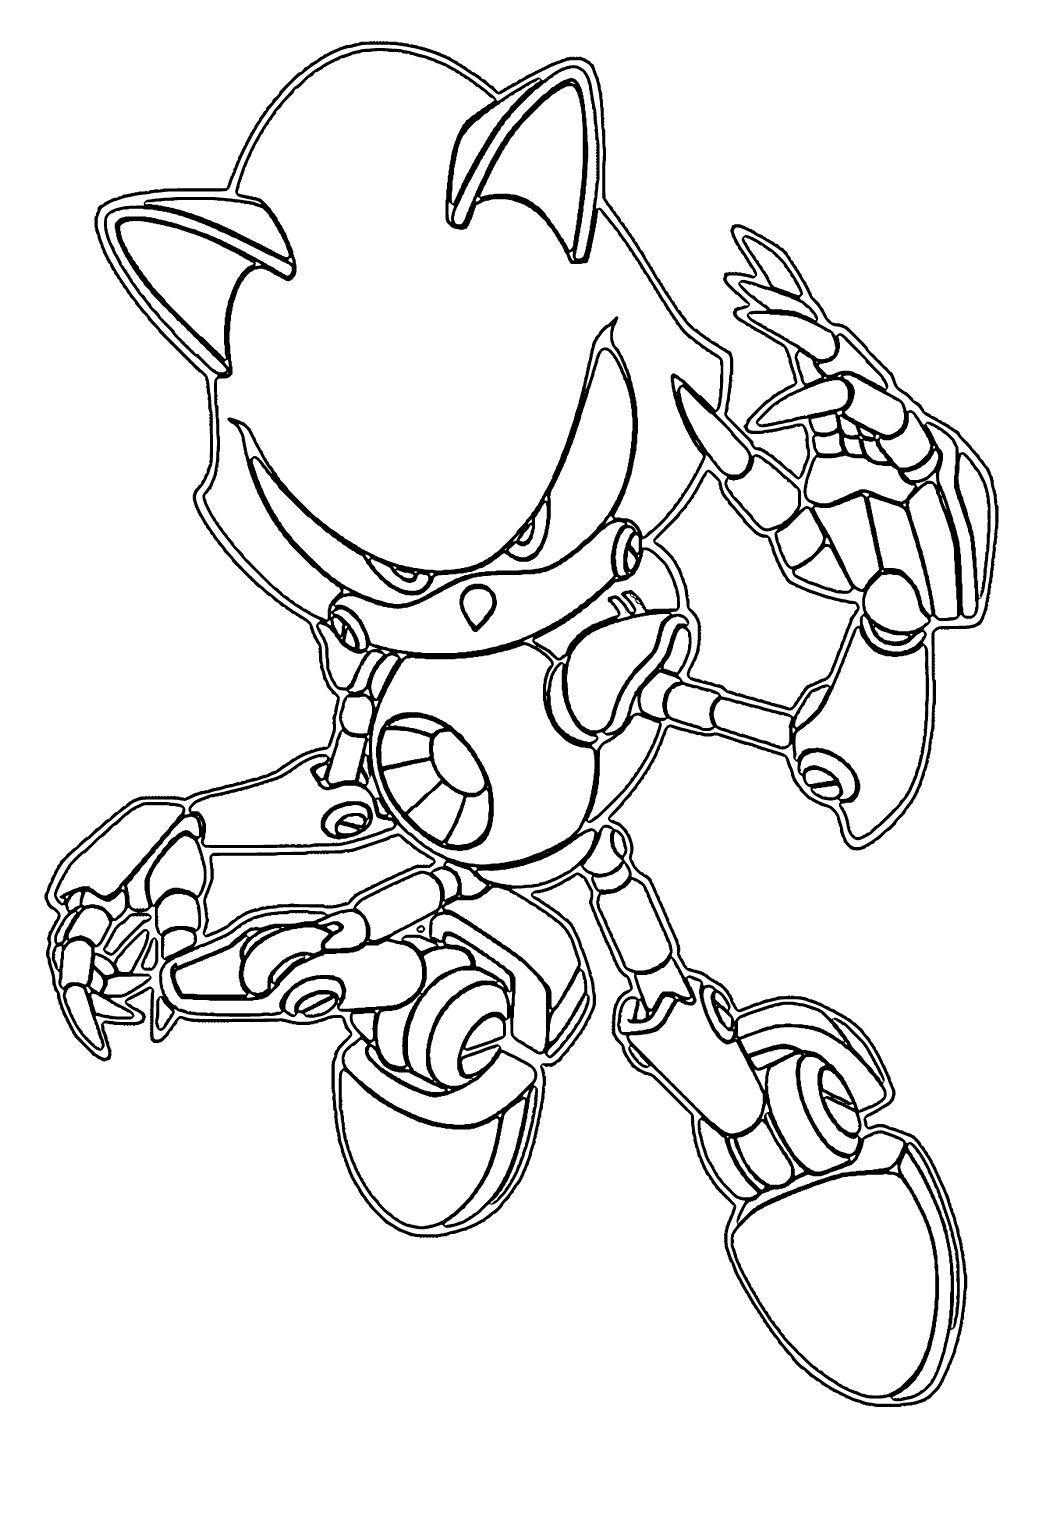 Amy Rose Sonic the Hedgehog Line art Shadow the Hedgehog Coloring book,  sonic the hedgehog, angle, white, mammal png